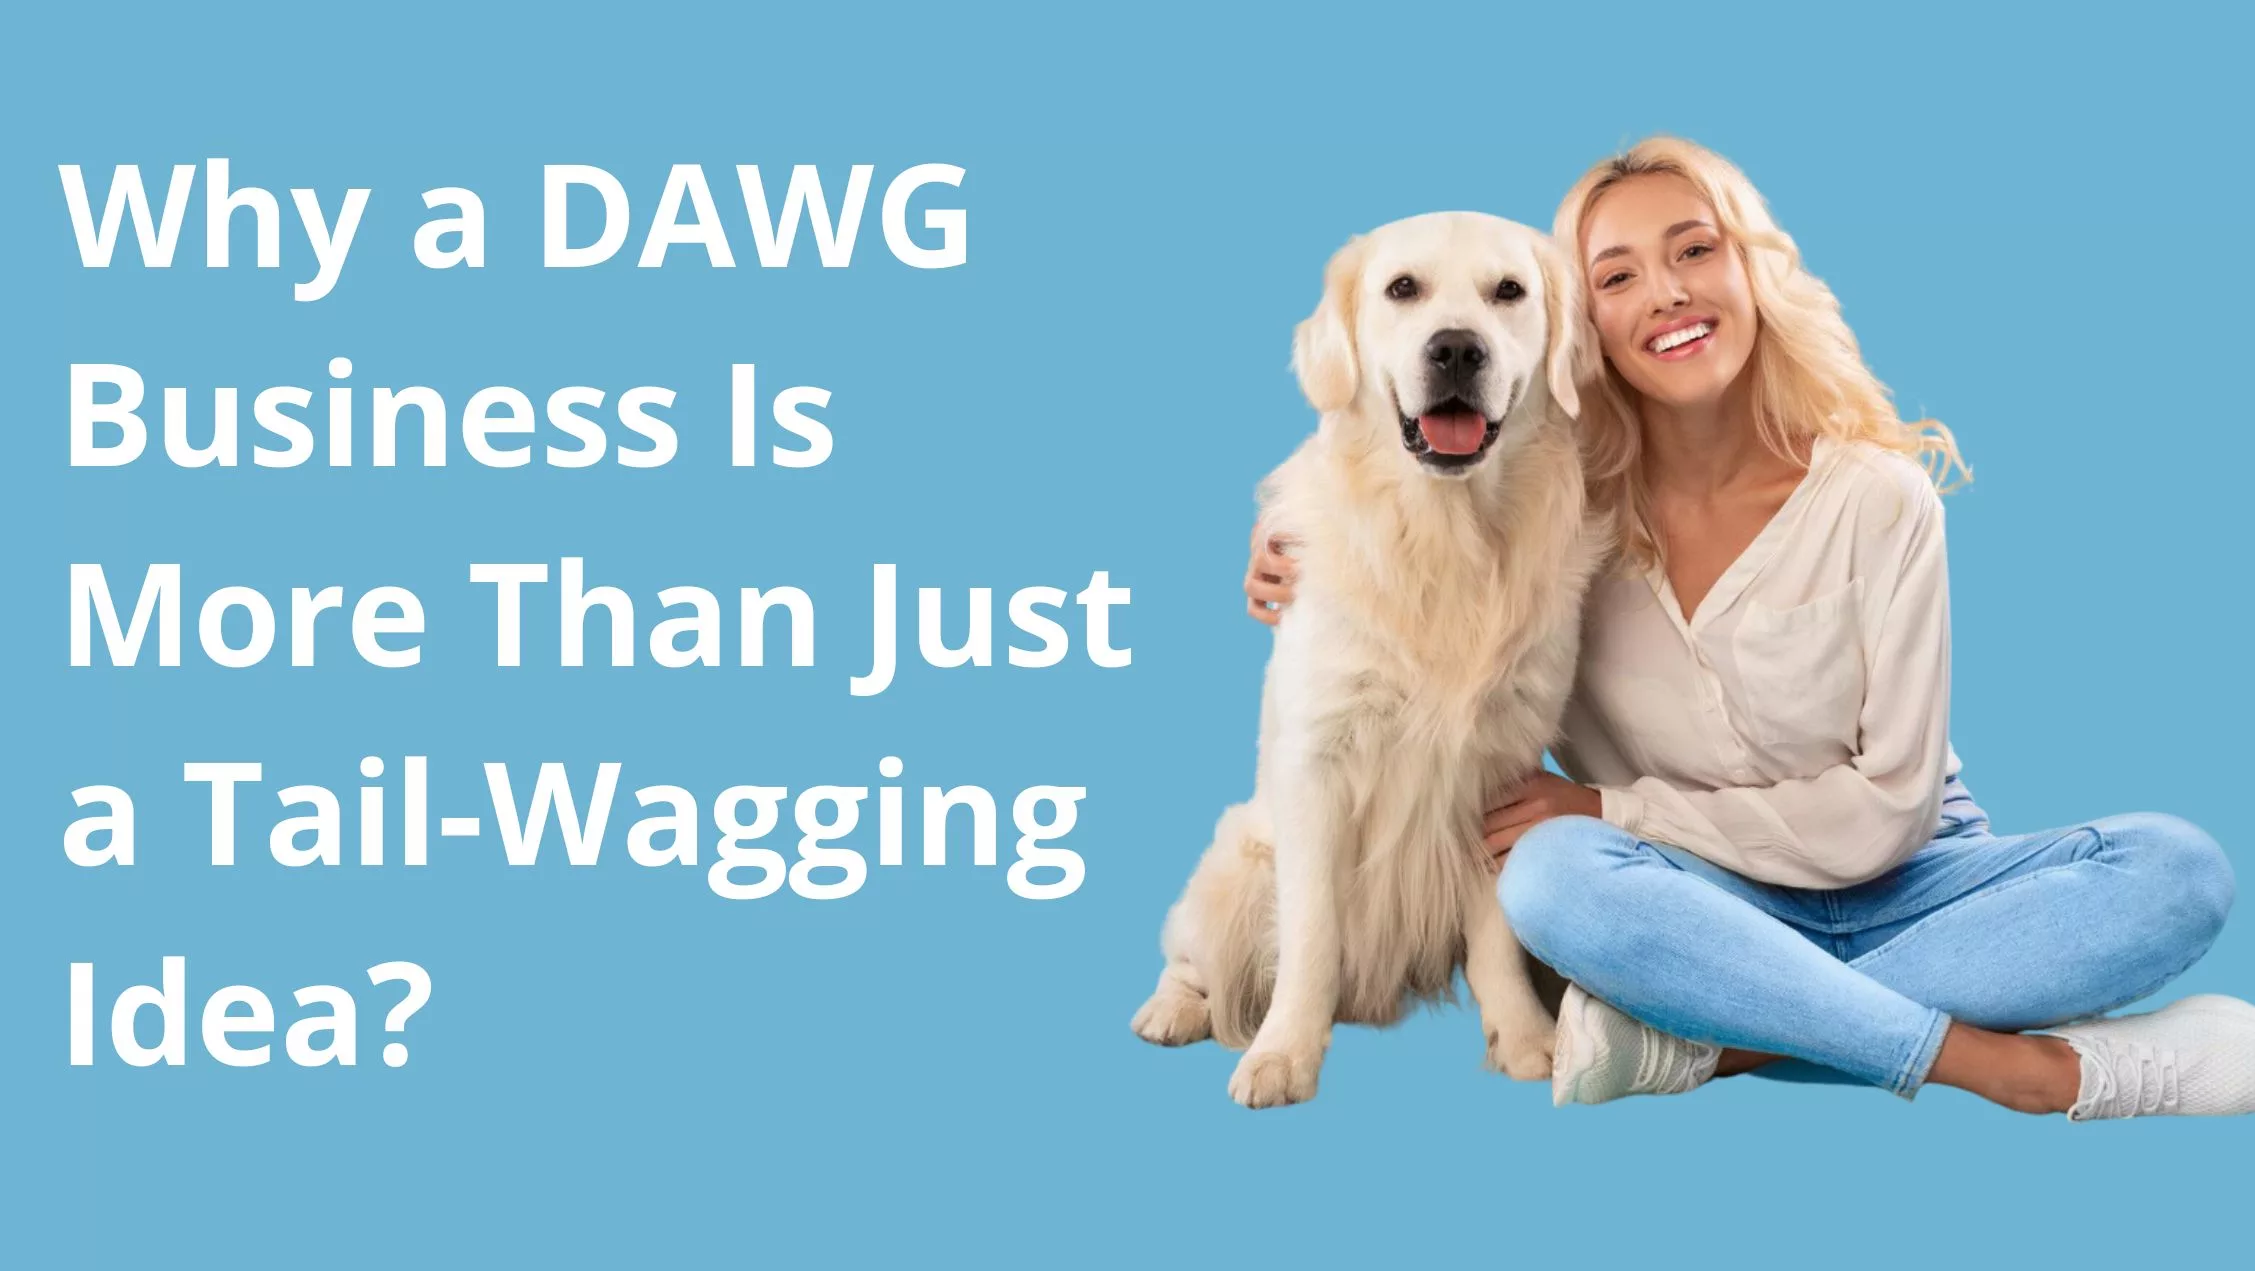 Why a DAWG Business Is More Than Just a Tail-Wagging Idea?